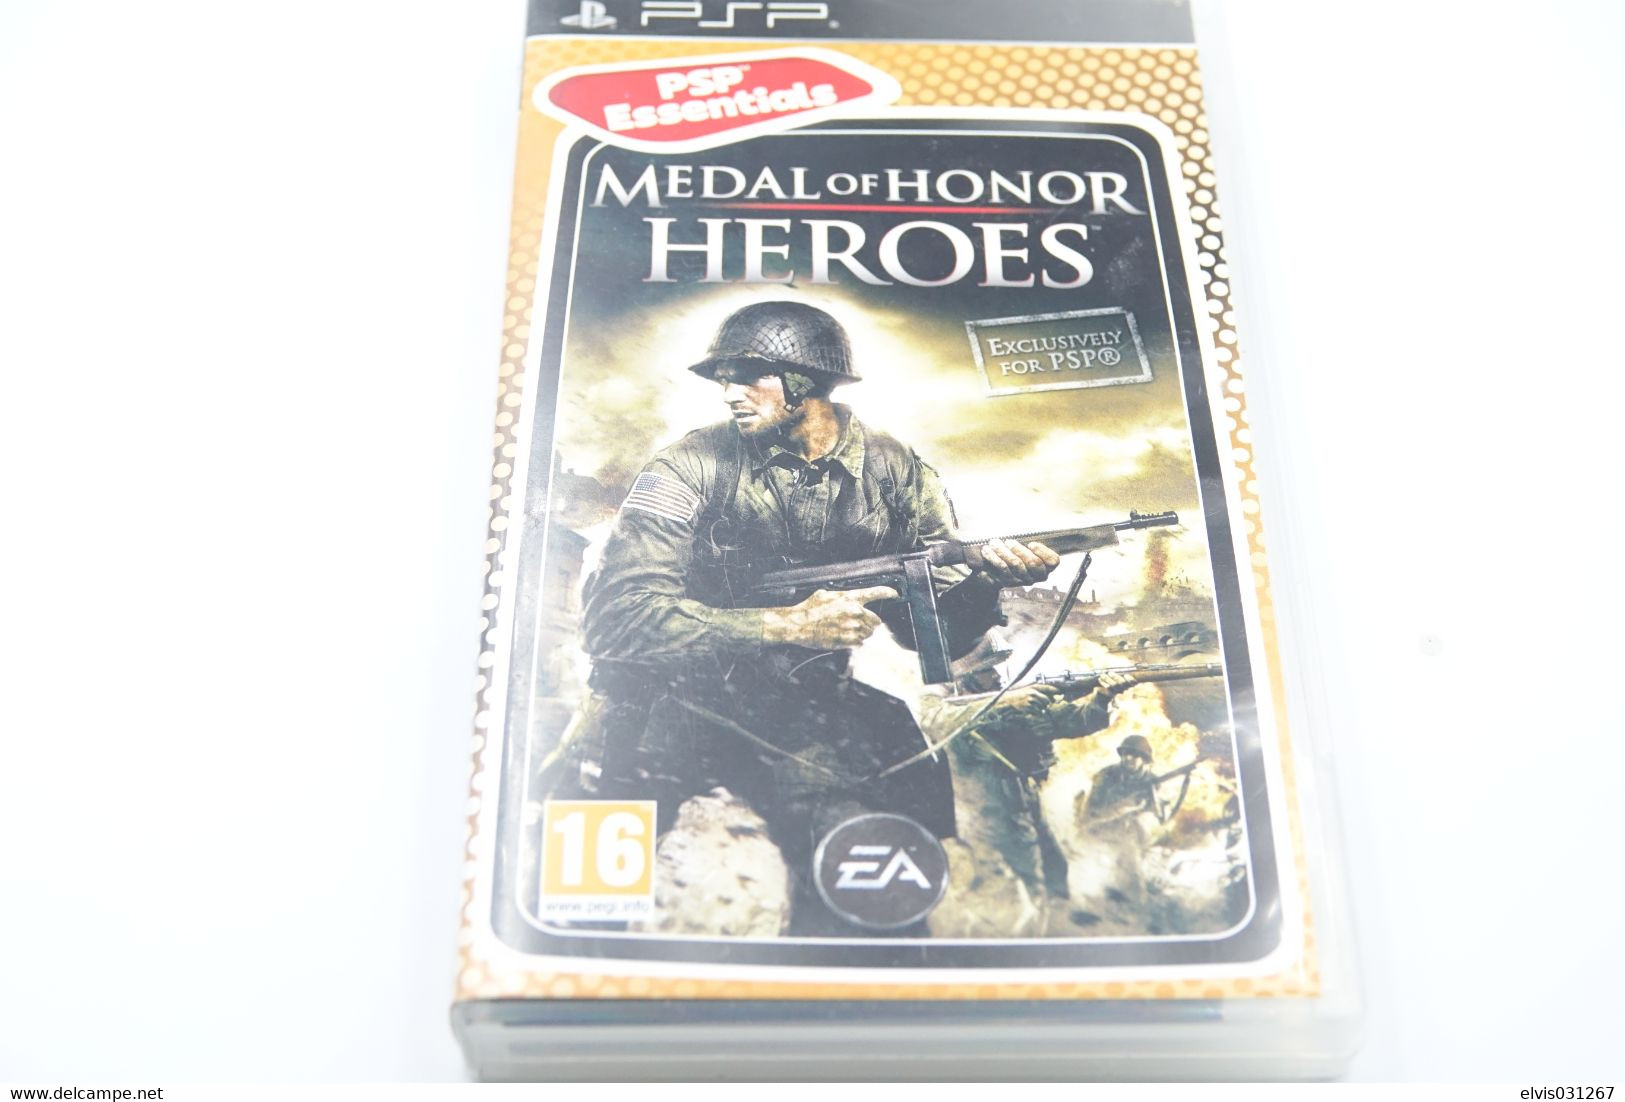 SONY PLAYSTATION PORTABLE PSP : MEDAL OF HONOR HEROES ESSENTIALS - EA ELECTRONIC ARTS - PSP